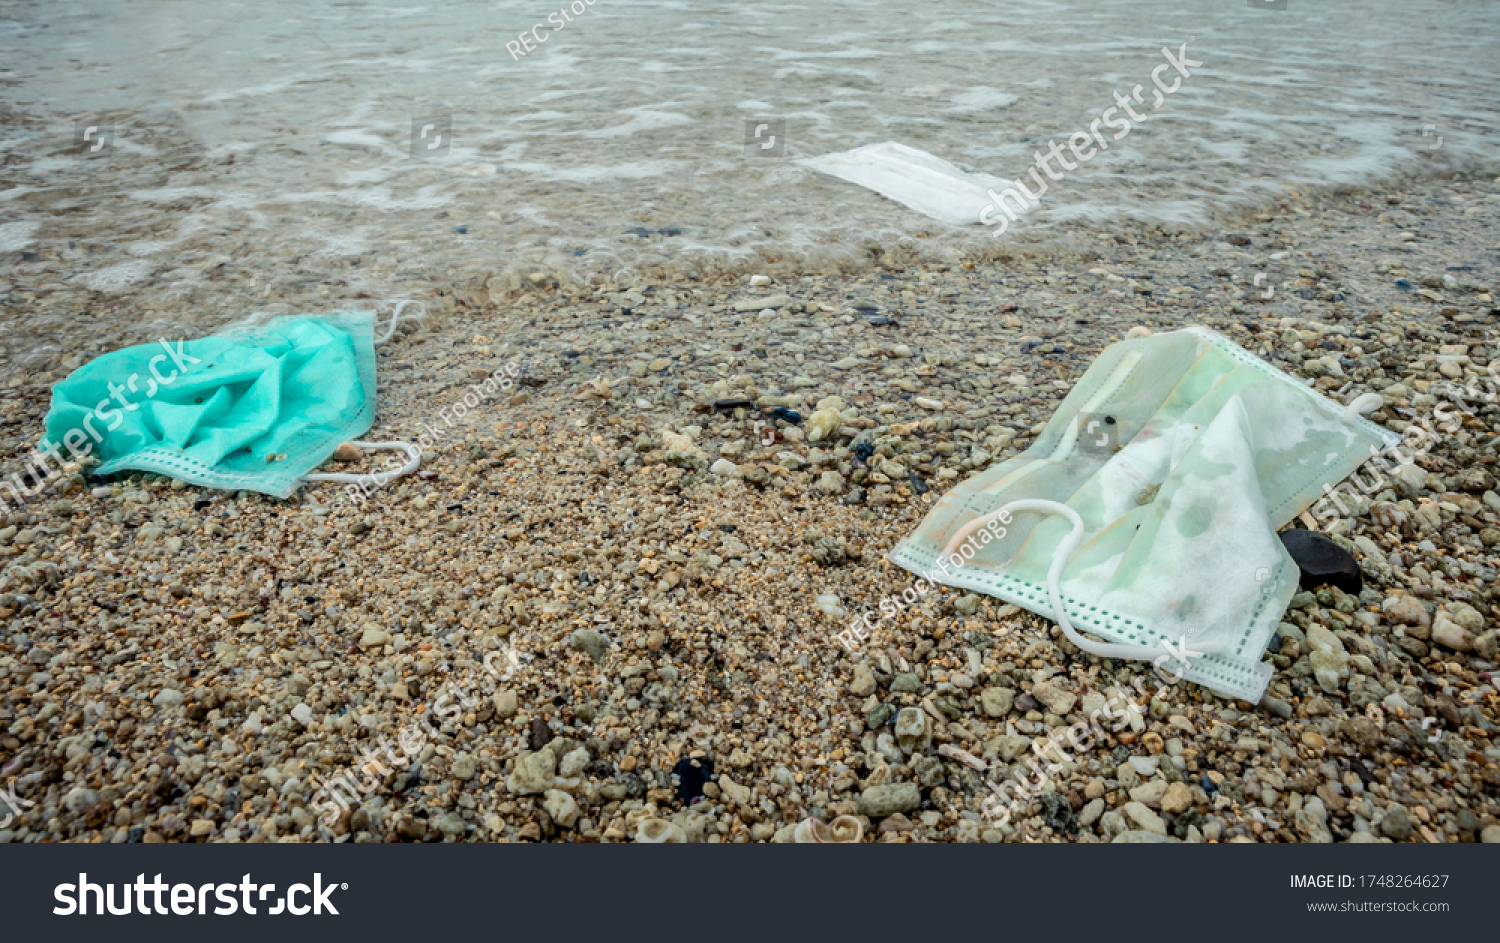 Waste during COVID-19. Discarded to ocean coronavirus single-use face masks. Environmental and coast plastic pollution. Trash in the beach threatening the health of oceans. #1748264627